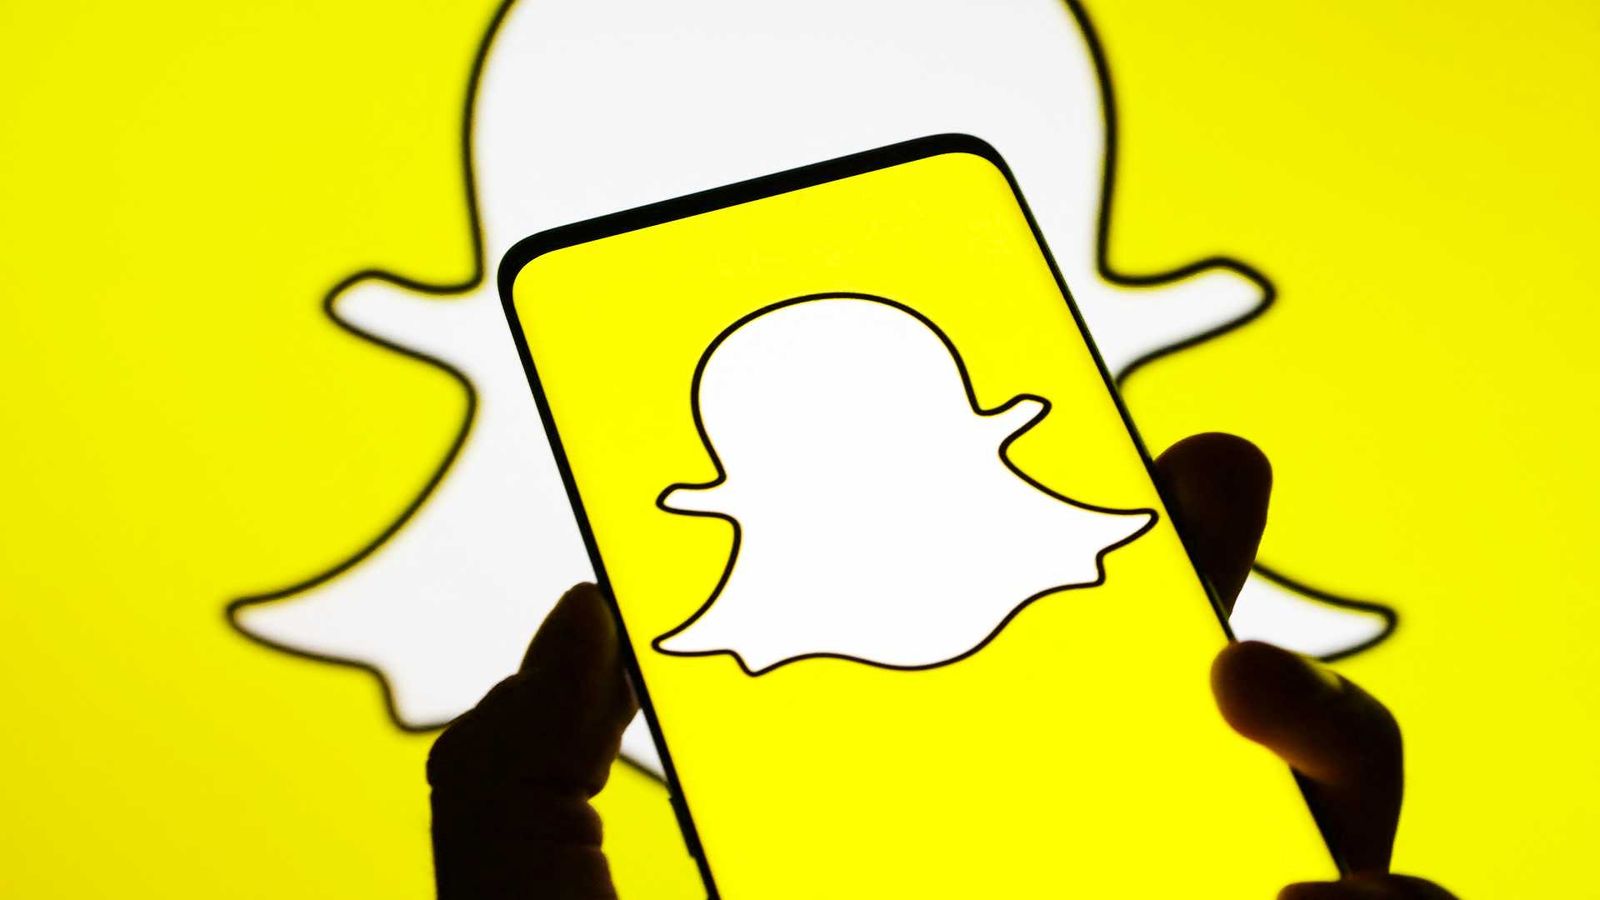 Picture of the Snapchat logo as background with a phone showcasing the Snapchat app